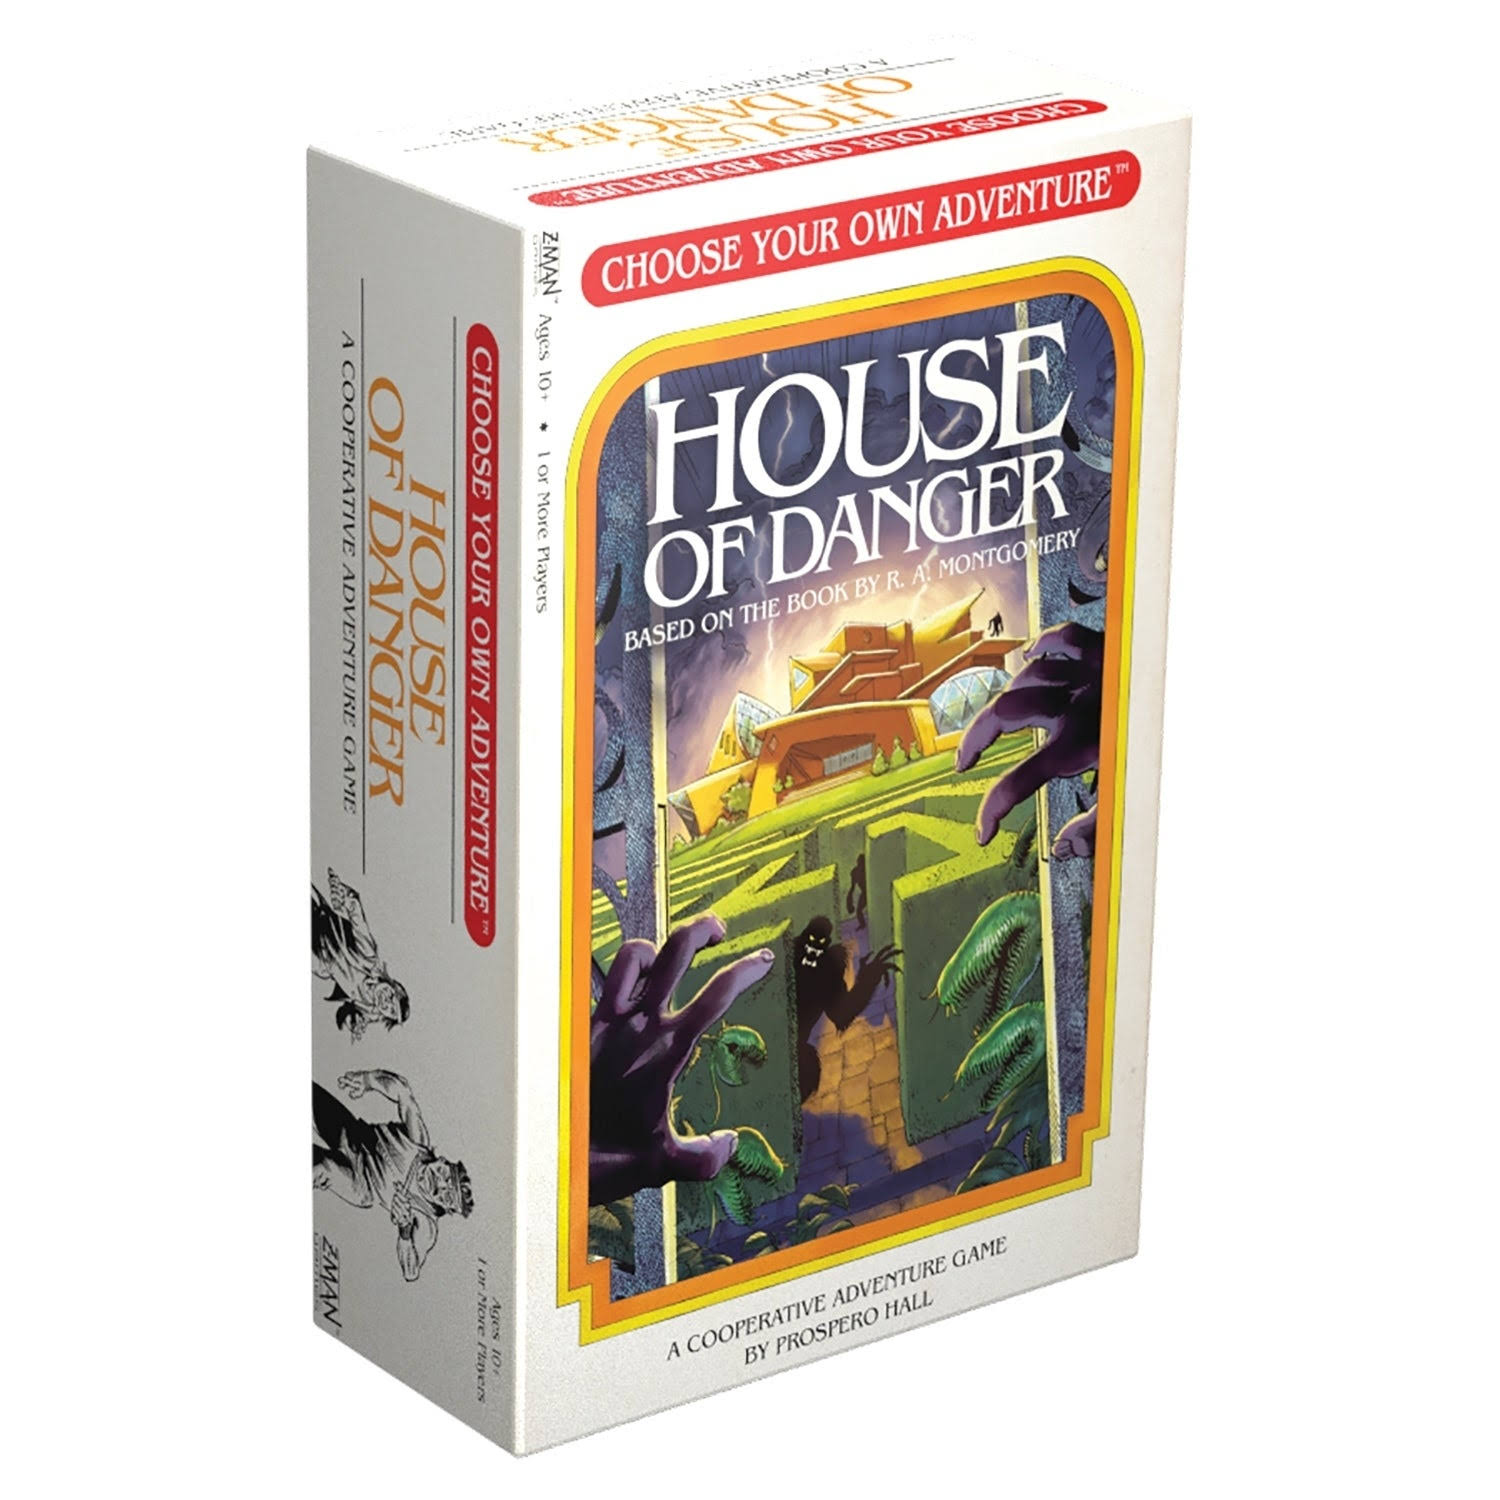 Choose Your Own Adventure House of Danger Card Game